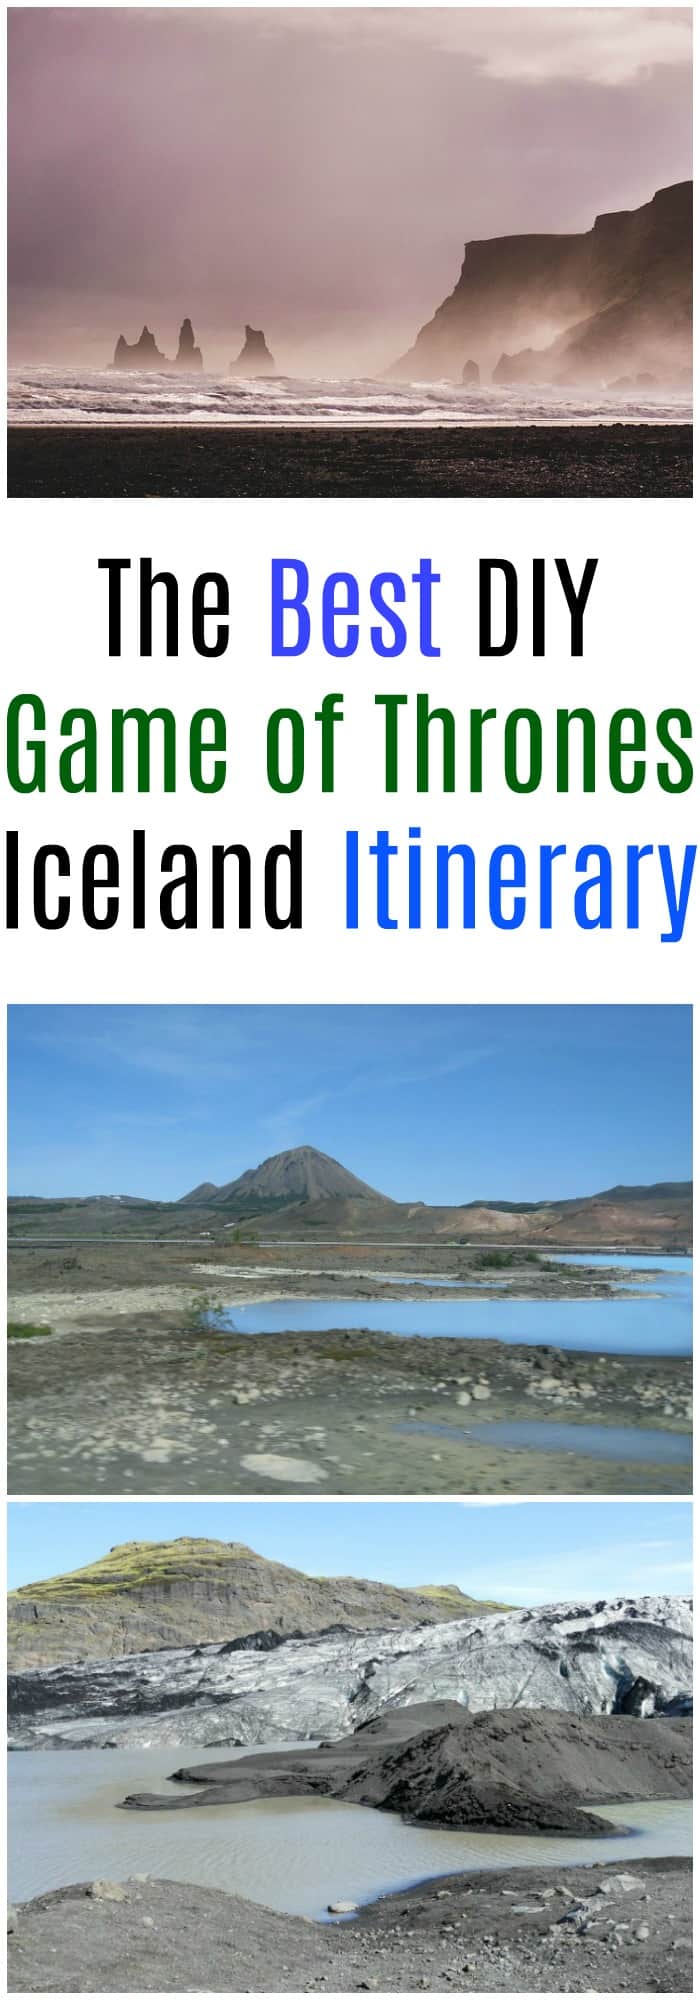 The best Game of Thrones Iceland DIY Itinerary for planning your trip. If you want to visit the Game of Thrones locations in Iceland without paying for a tour this travel guide takes you to all the famous spots as well as some can't miss places to visit in Iceland too #Iceland #GameofThrones #traveltips #travelhacks 